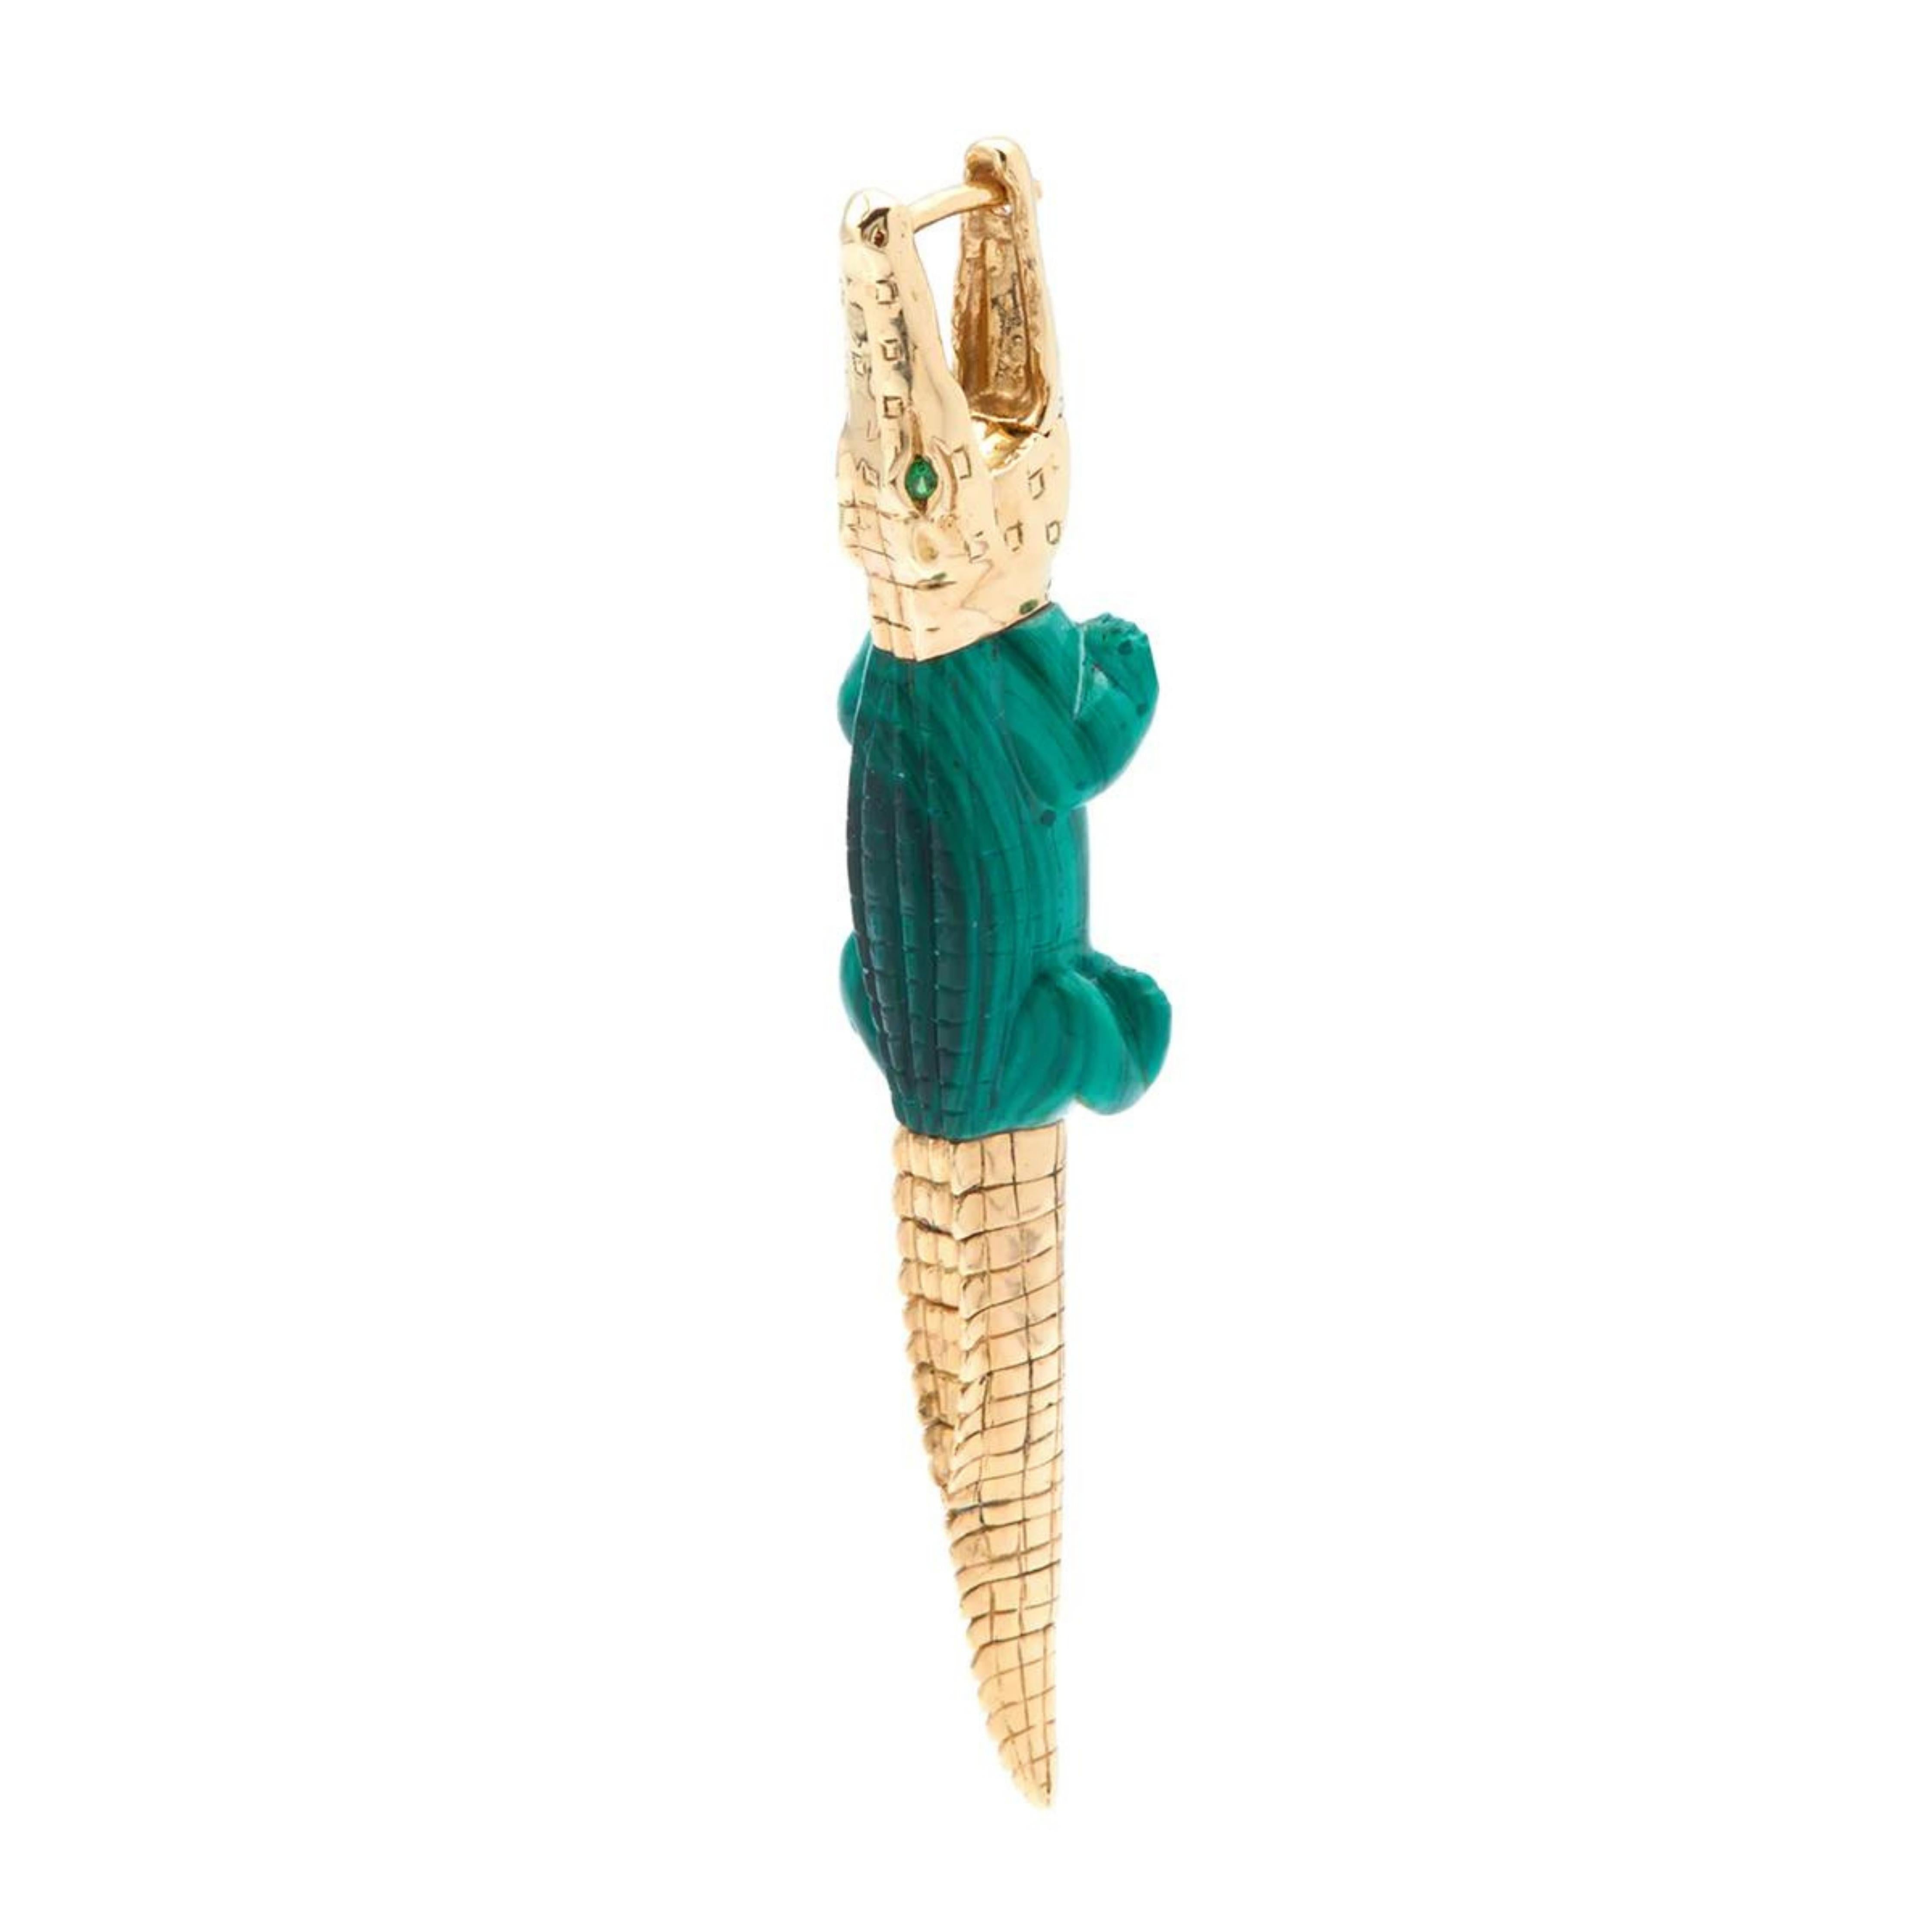 Bibi van der Velden Malachite Alligator Earring. Hand-carved to replicate the body of a mini alligator, the 18K yellow gold earring is adorned with tsavorite stones and a malachite carved body.  Shown from the side view.